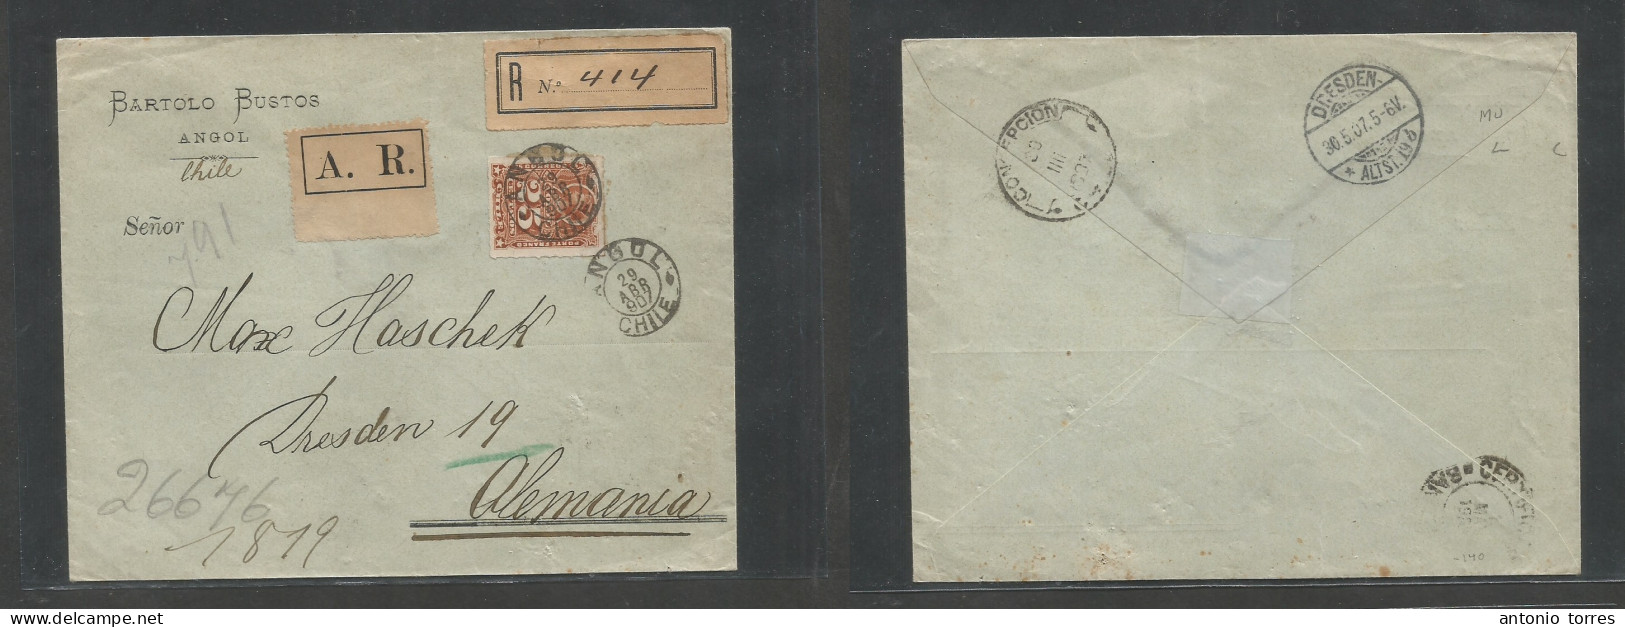 Chile - Xx. 1907 (29 Apr) Angol - Germany, Dresden (30 May) Comercial Registered AR Single 25c Brown Fkd Envelope, Tied - Chili